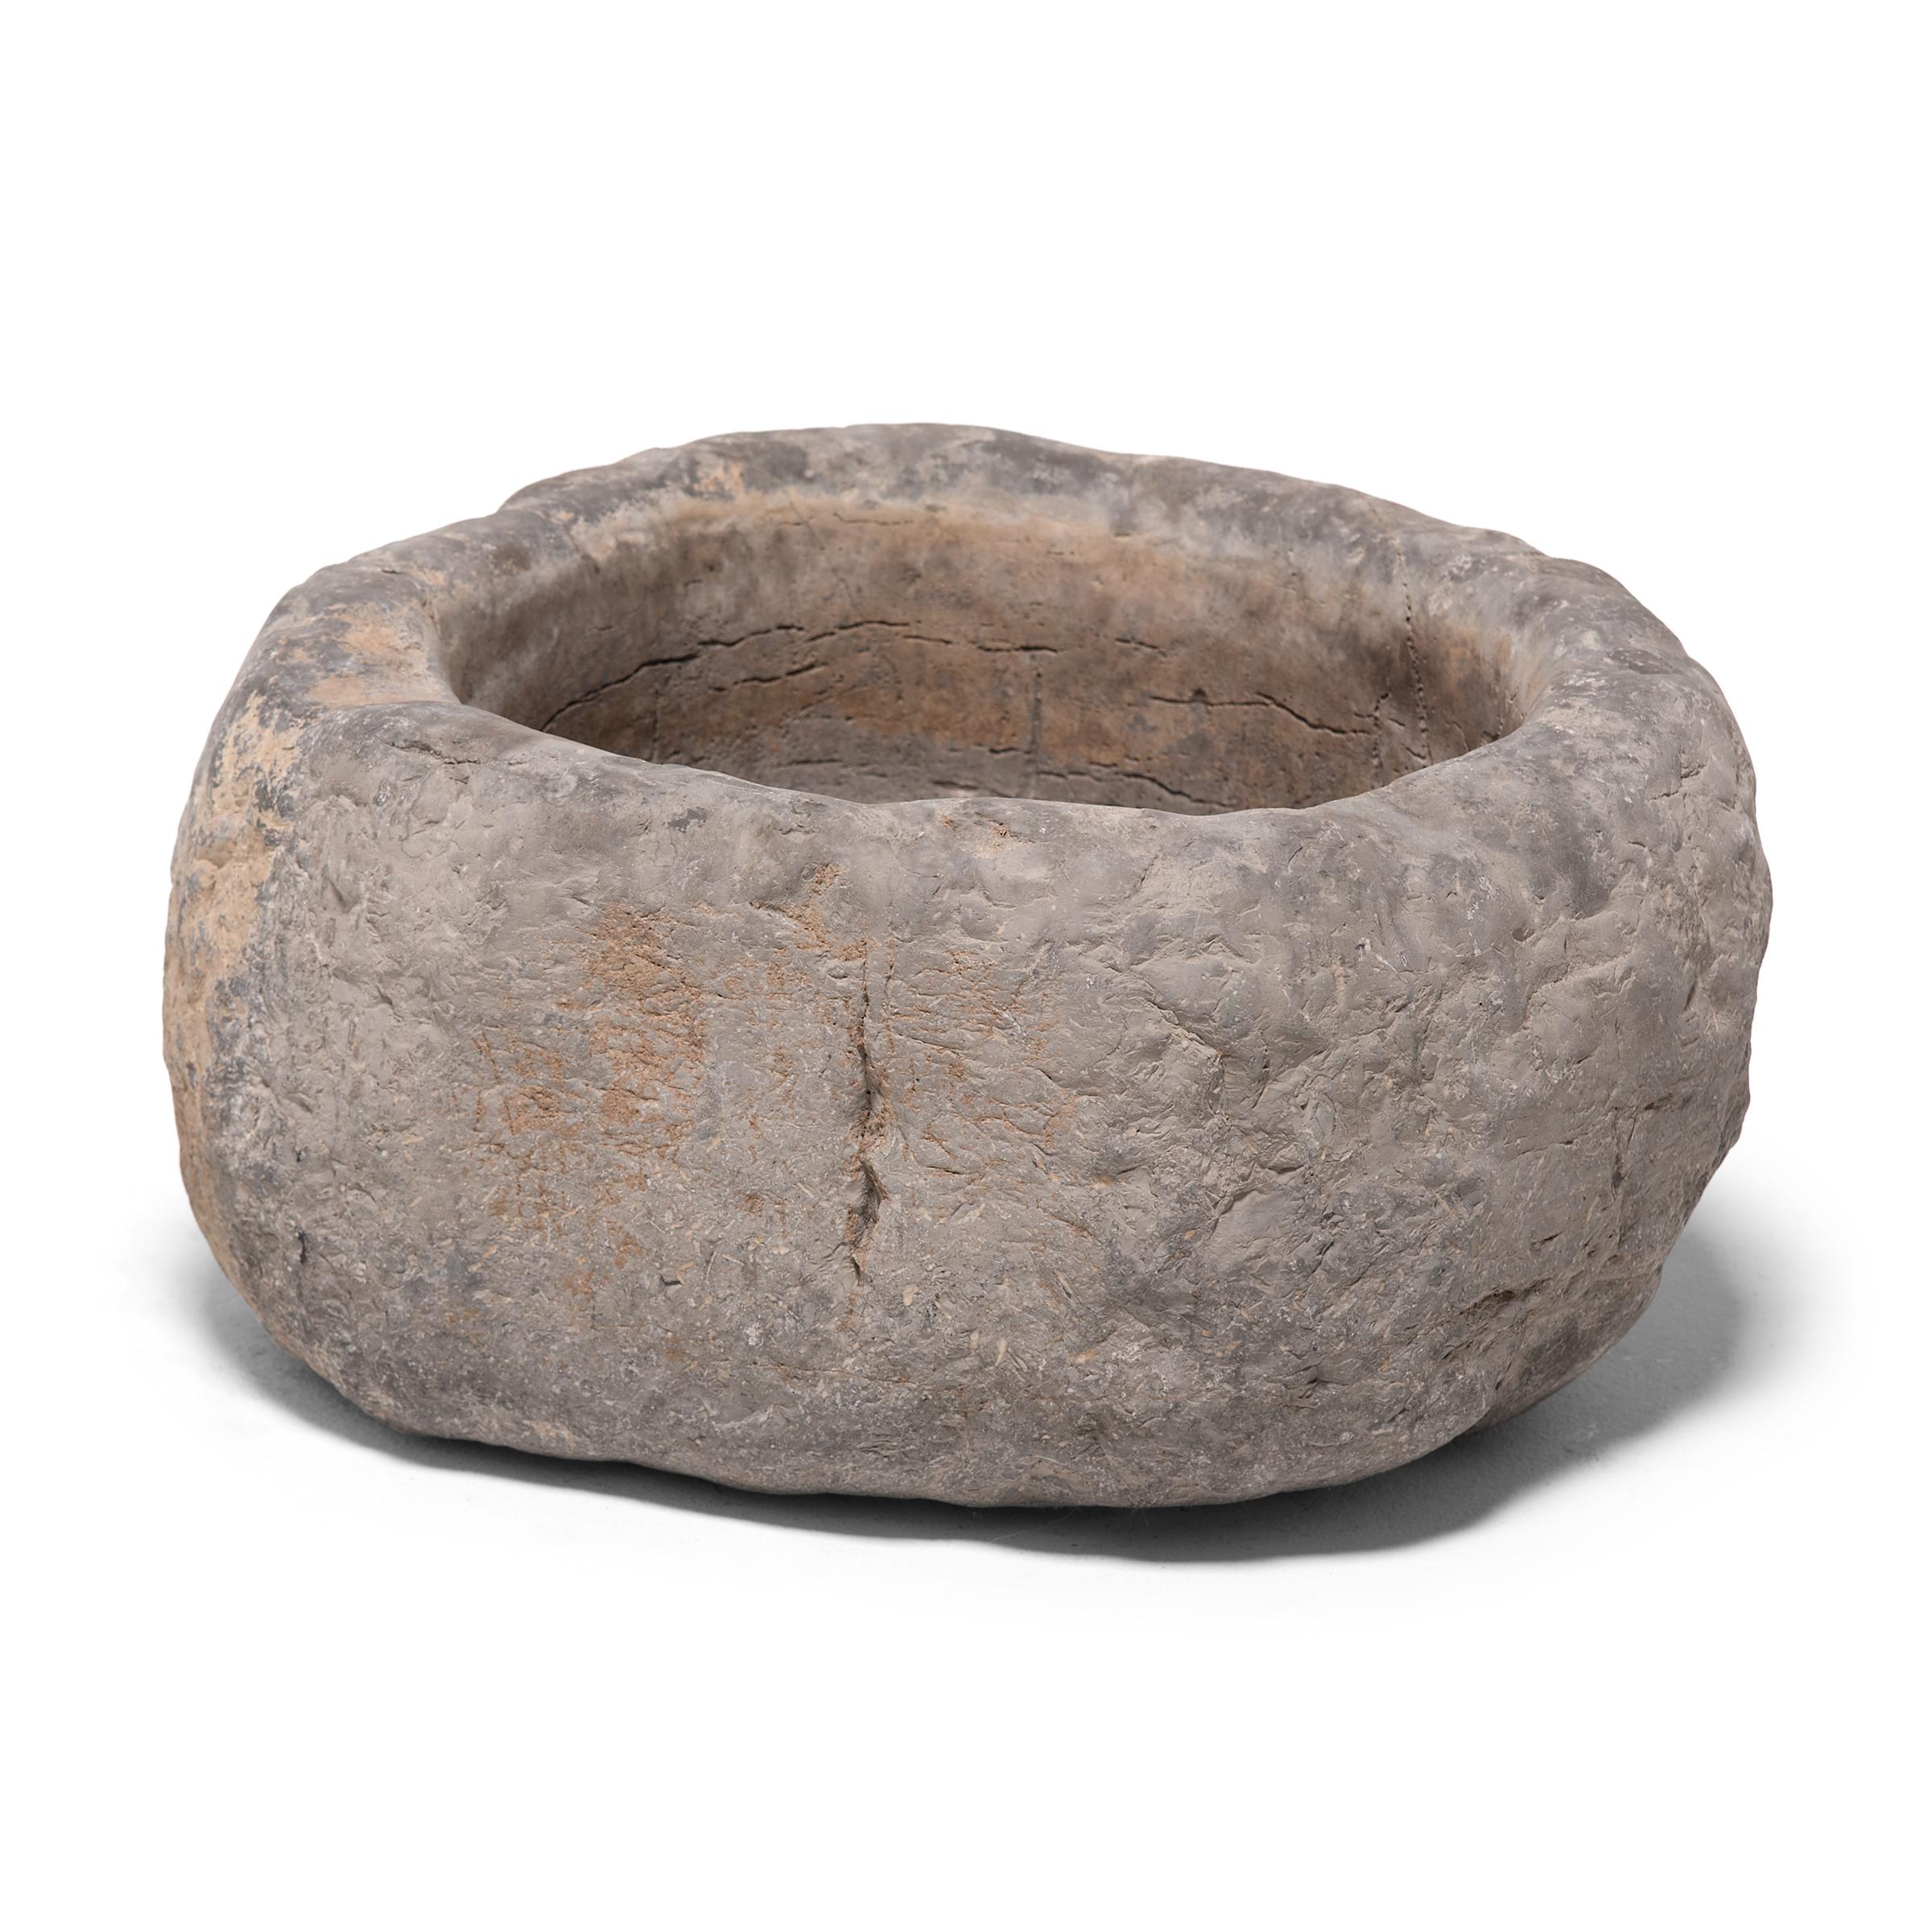 This limestone basin was carved by hand over two centuries ago, and like many Chinese designs, has an elegantly simple form. In China, rock as an element is classified as 